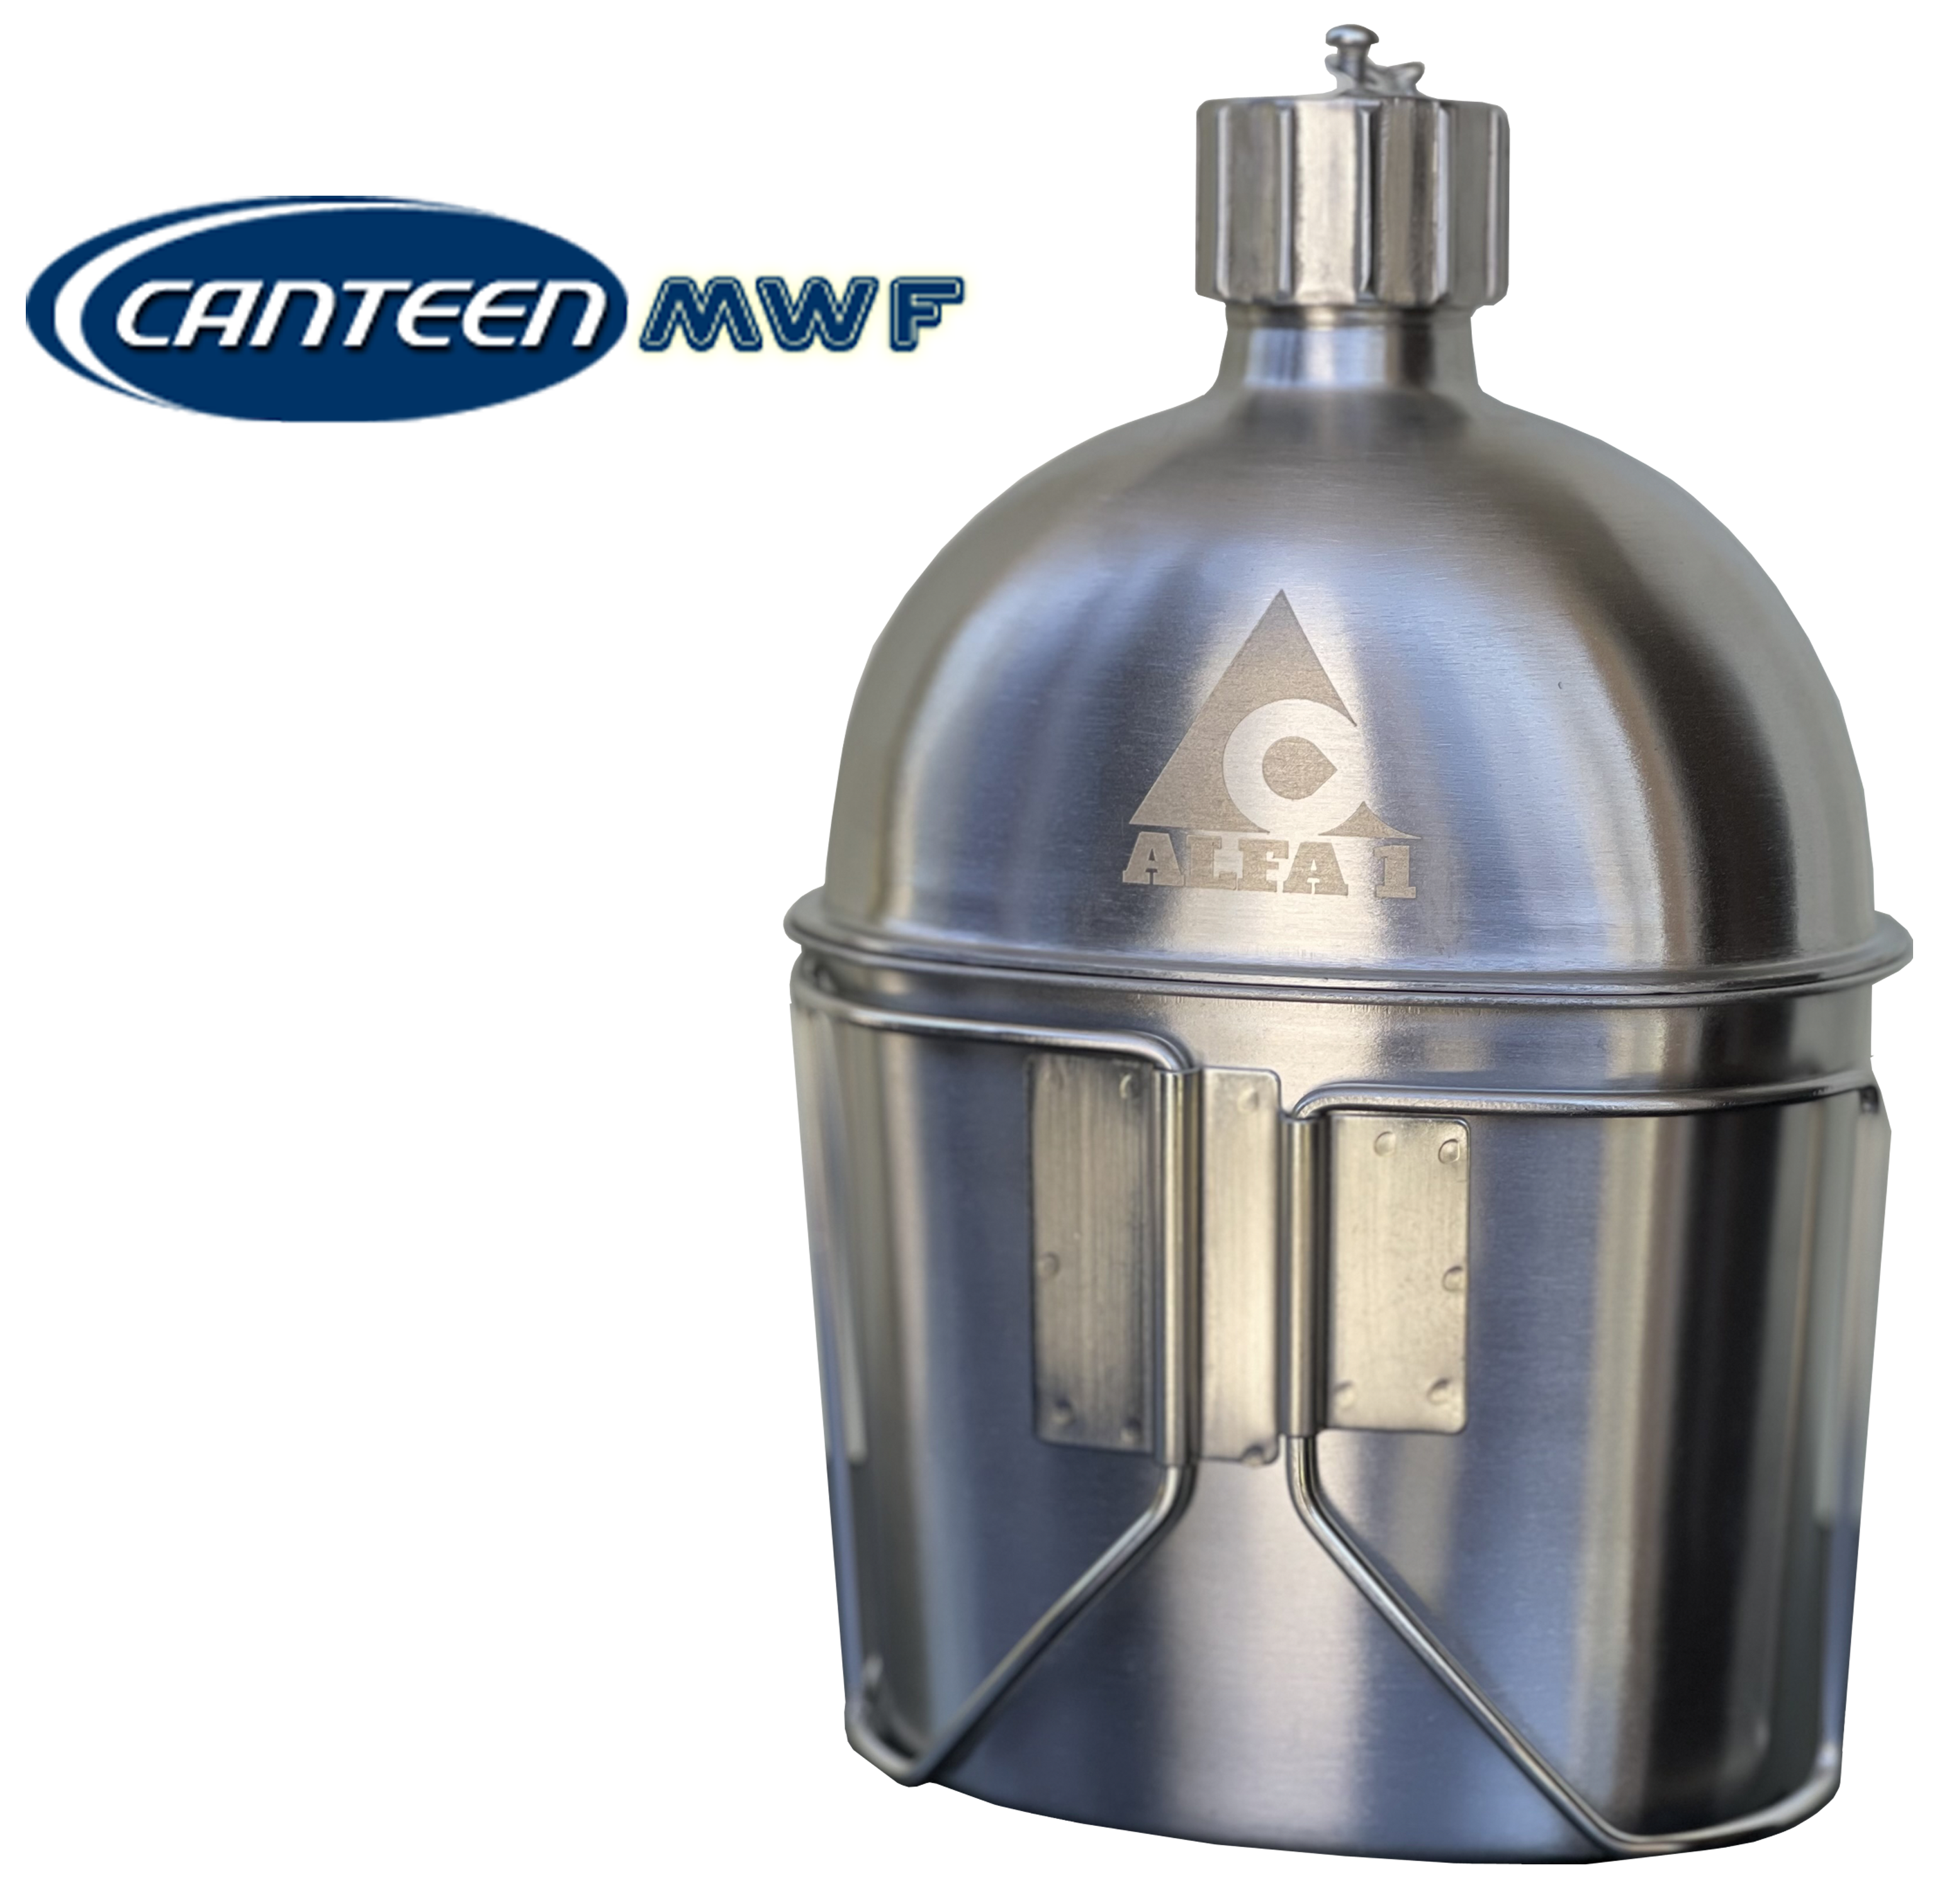 Stainless Steel Canteen